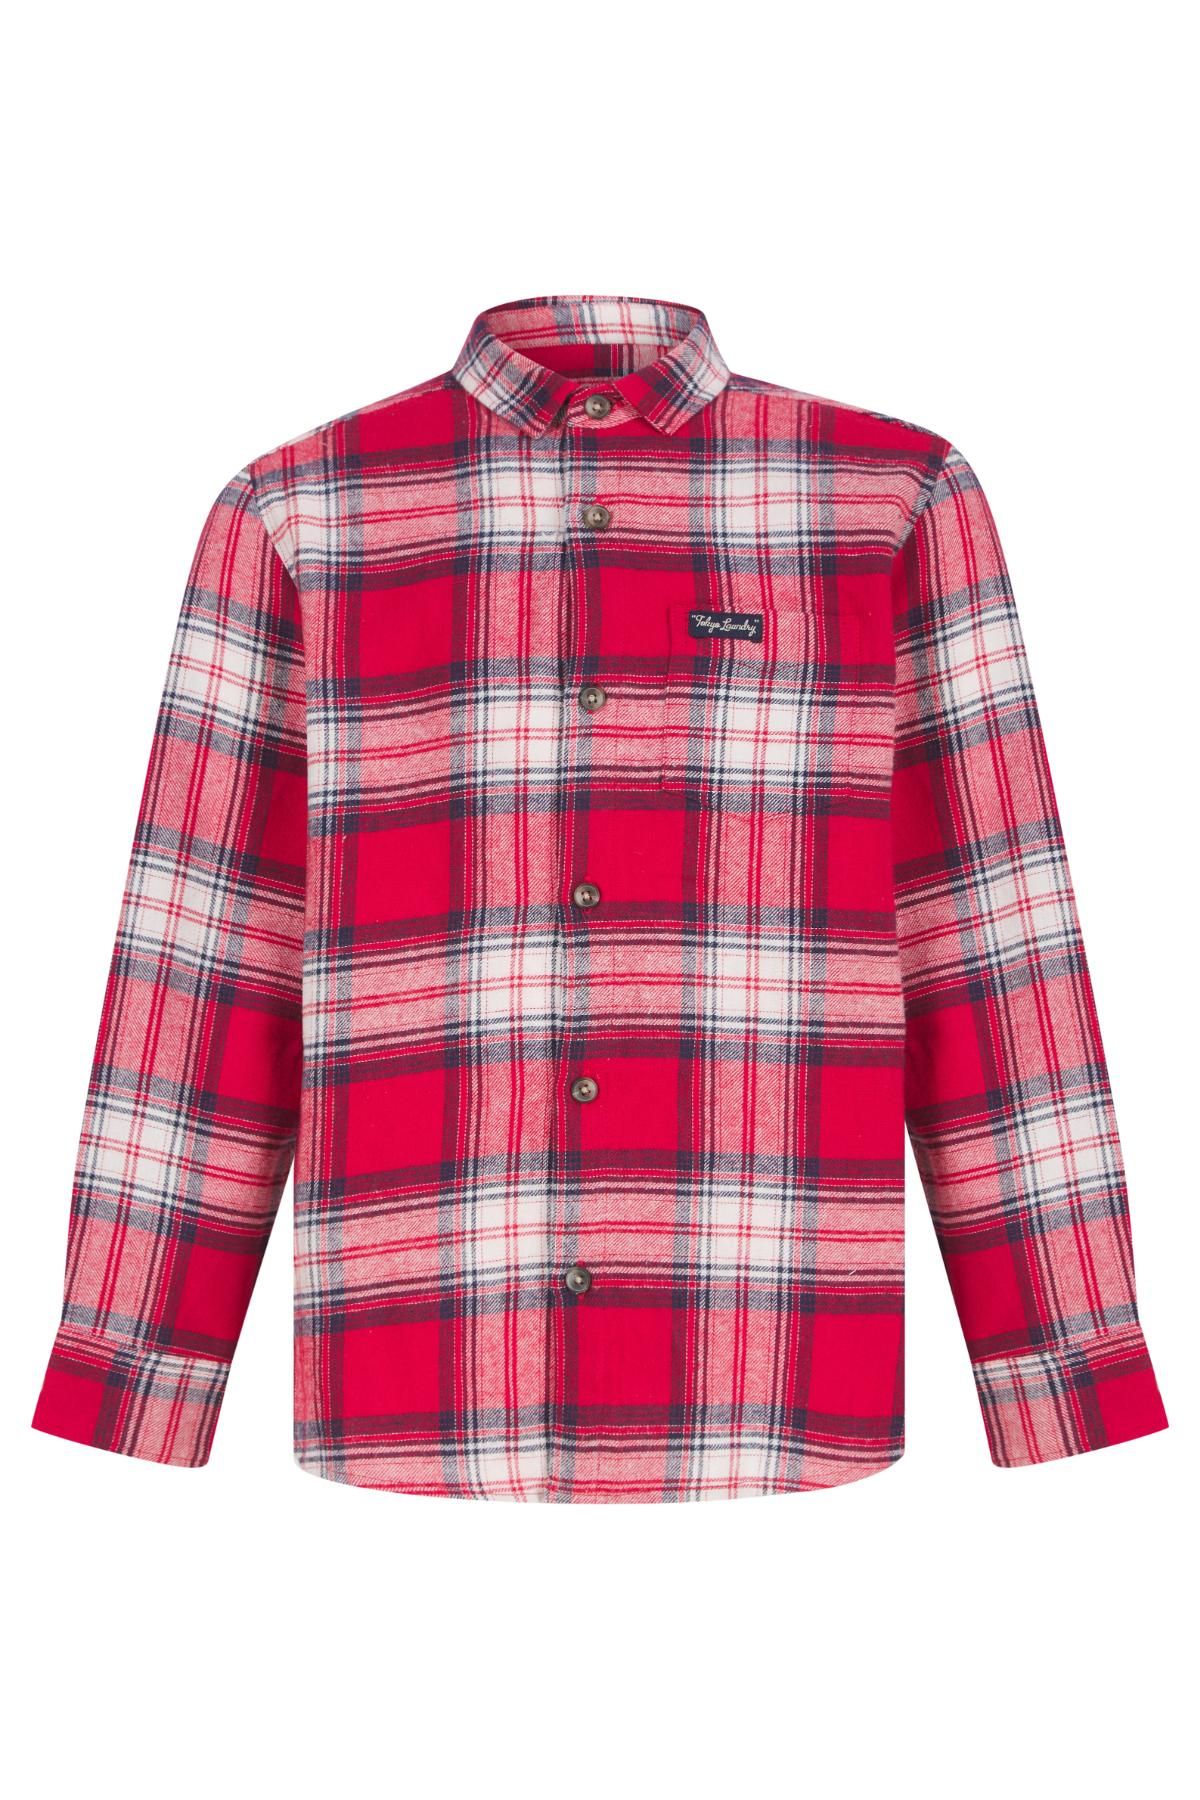 Tokyo Laundry Boys Flannel Shirt Red